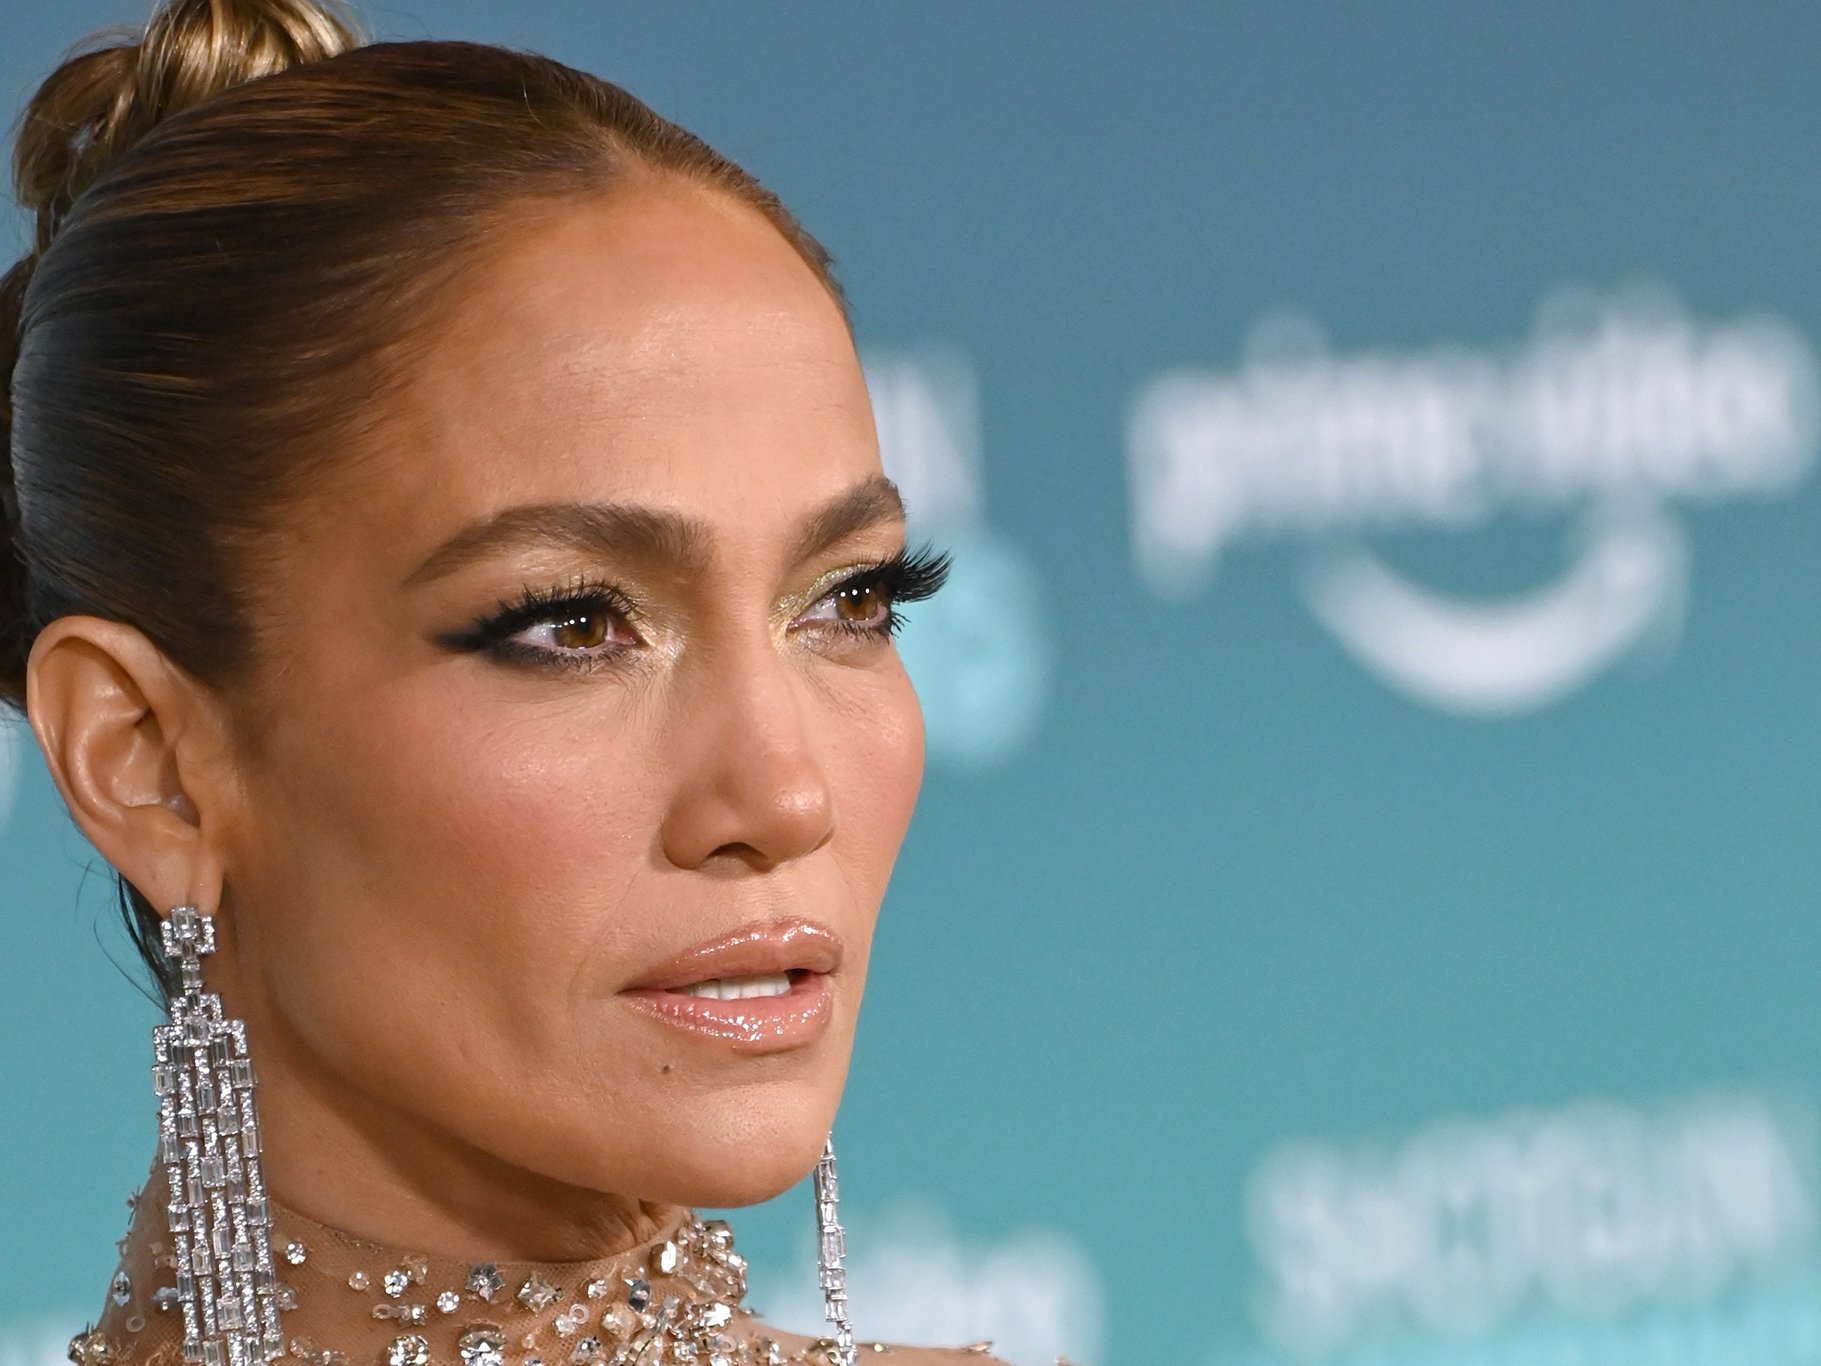 JLo-inspired programmes include 90s dance classes and panel discussions.